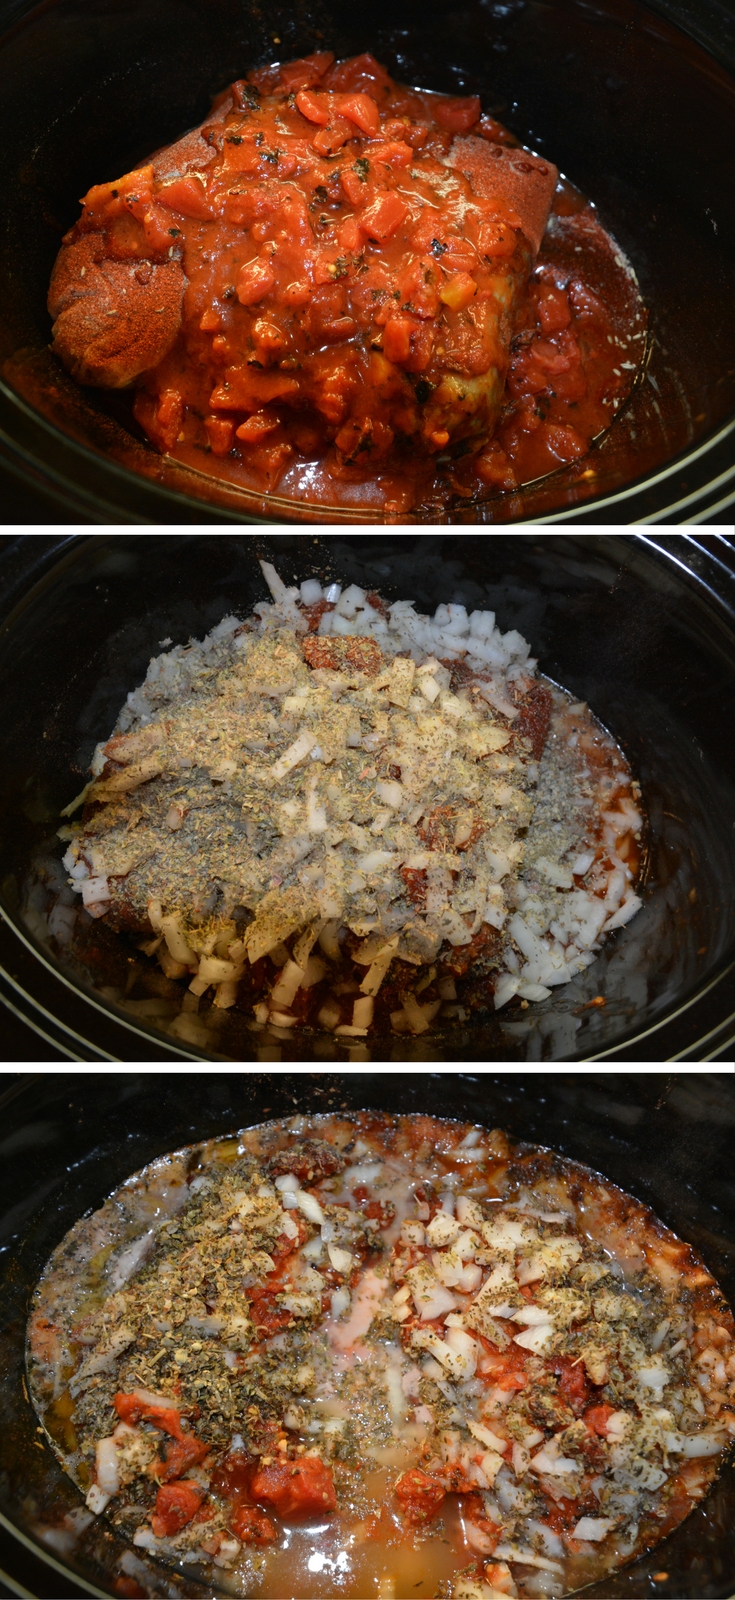 Creamy, rich, and meaty make this crock pot low-carb lasagna soup recipe one I will make over and over.